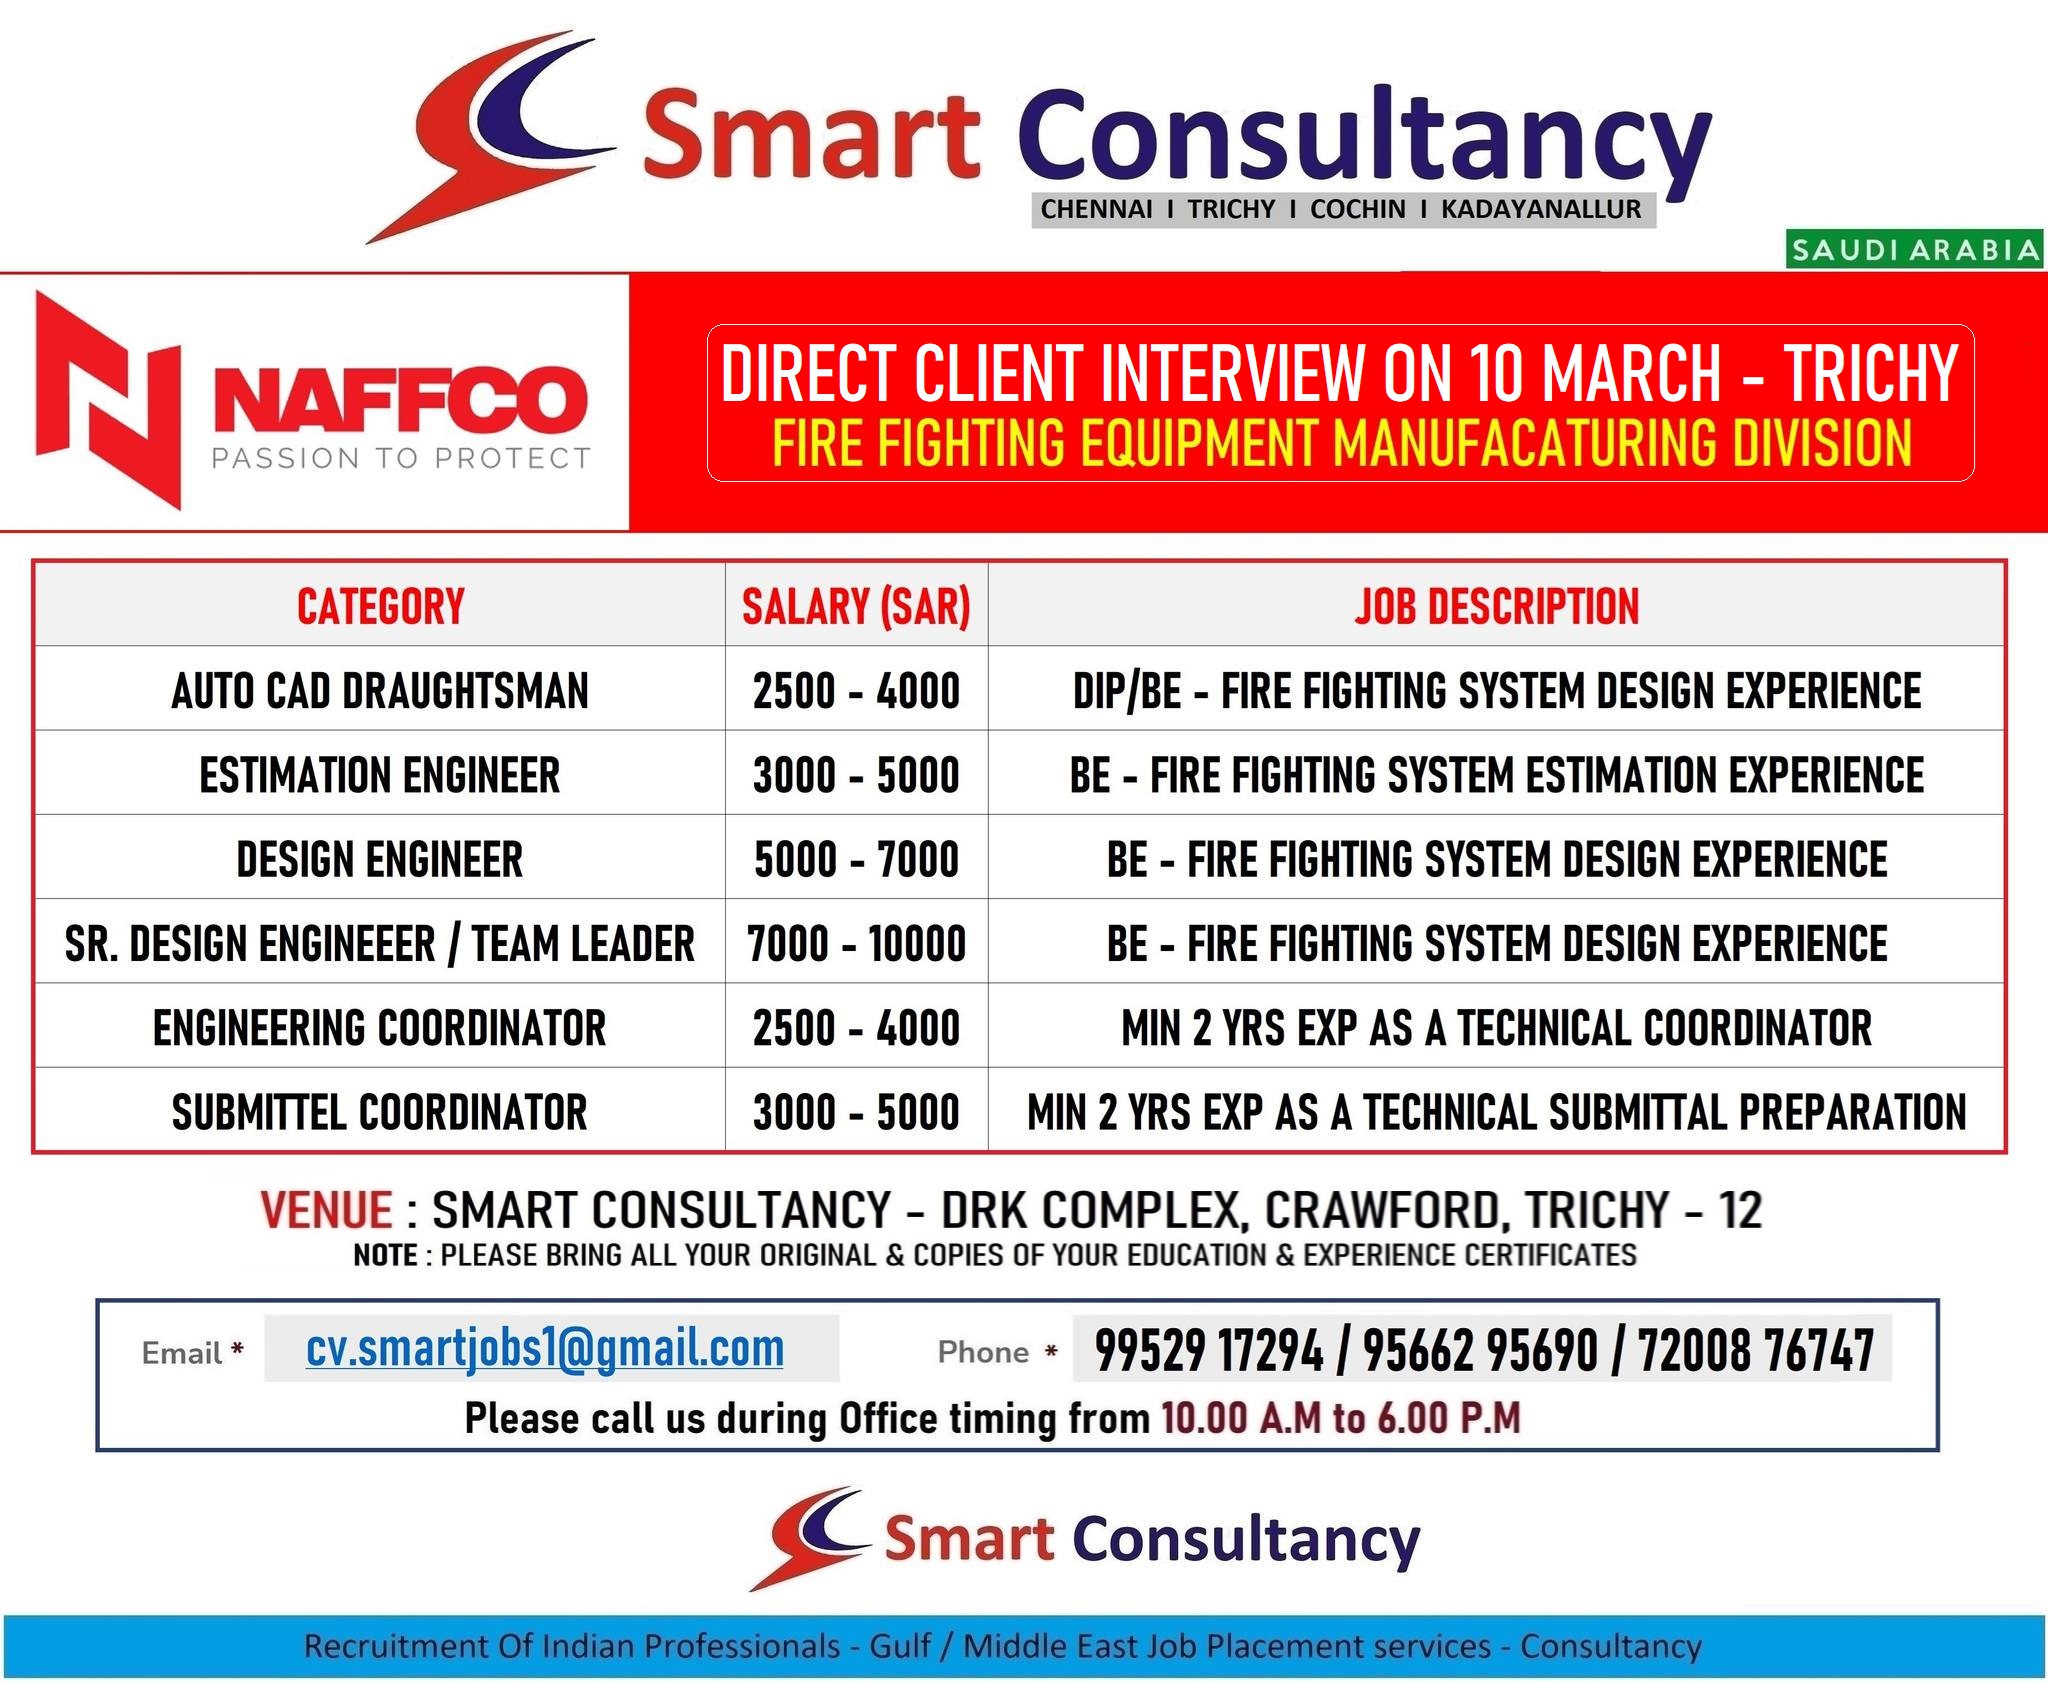 WANTED FOR A LEADING FIRE EQUIPMENT MANUFACTURING COMPANY – SAUDI / DIRECT CLIENT INTERVIEW ON 10 MARCH – TRICHY